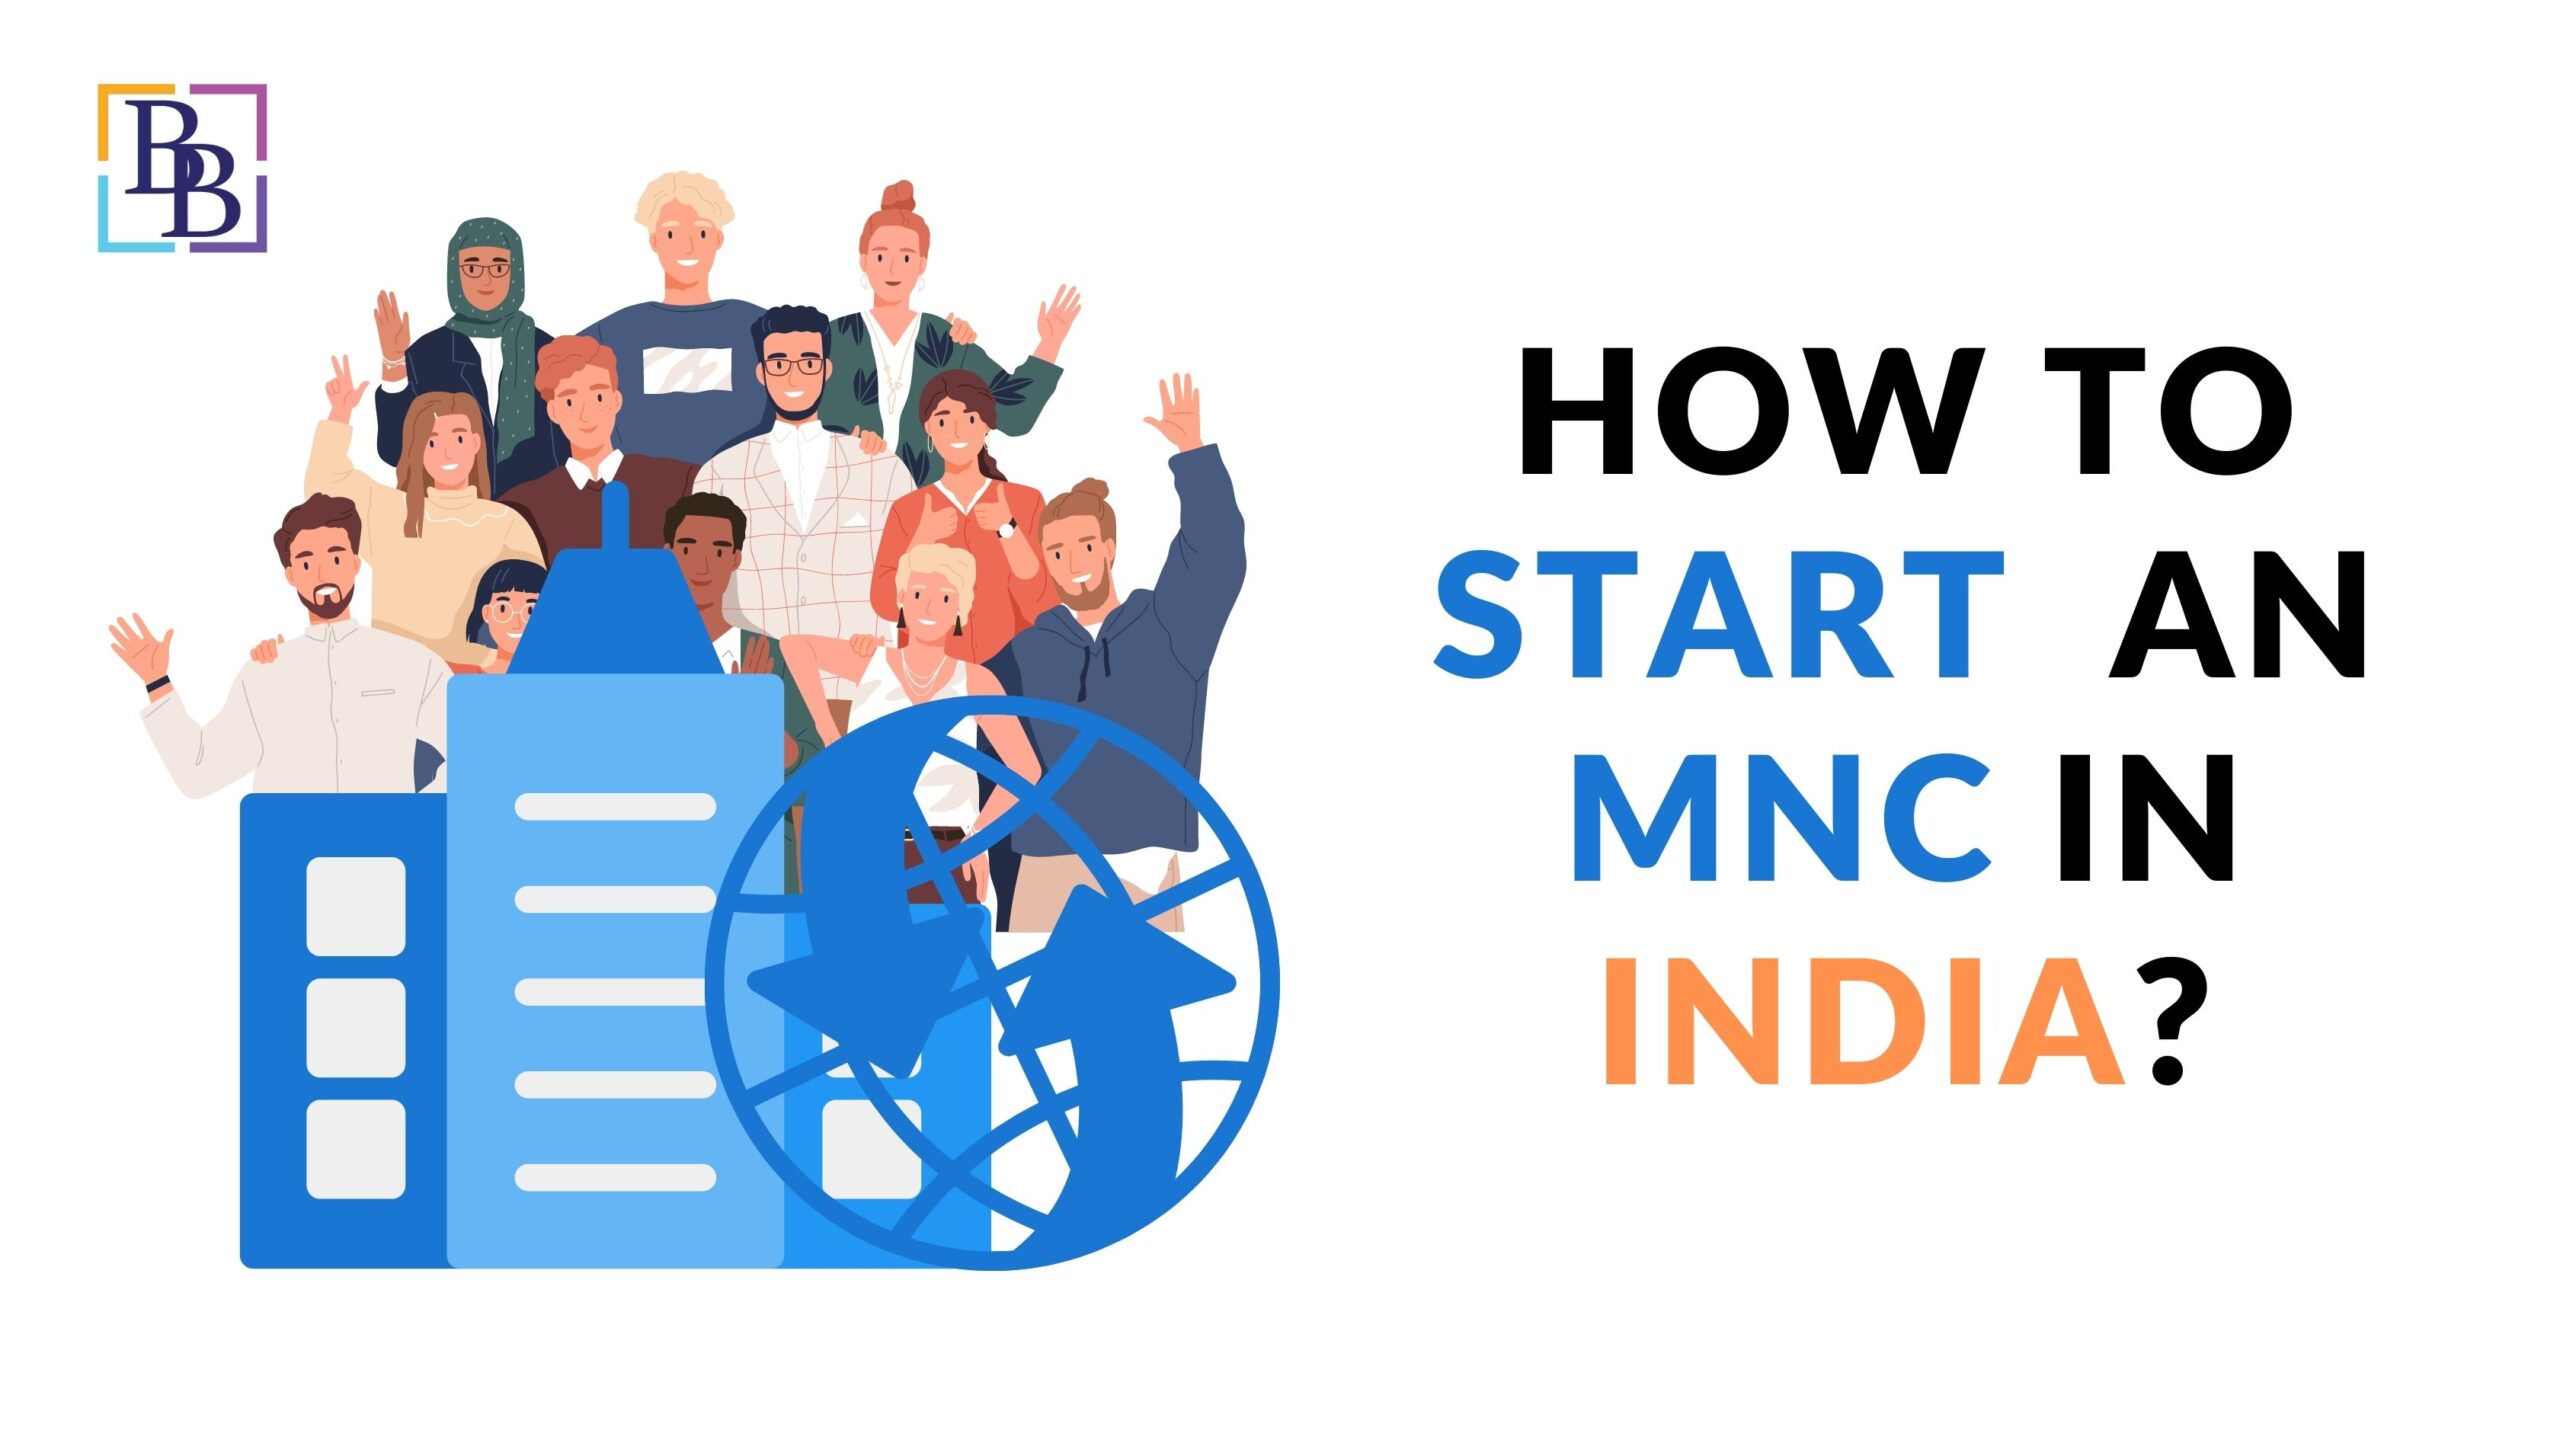 How to start an MNC in India